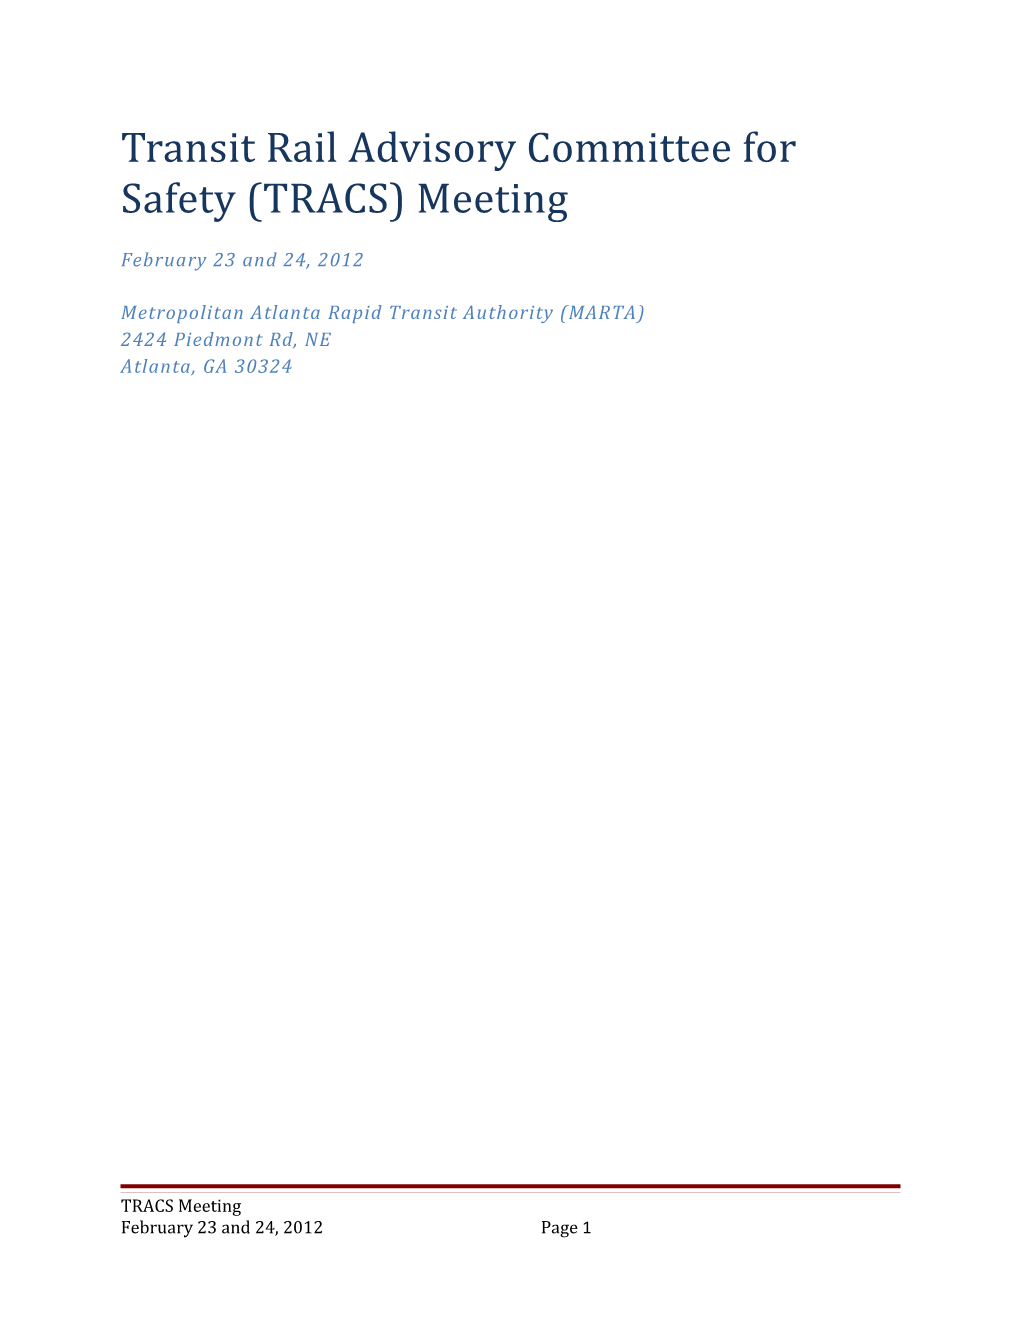 Transit Rail Advisory Committee for Safety (TRACS) Meeting s1